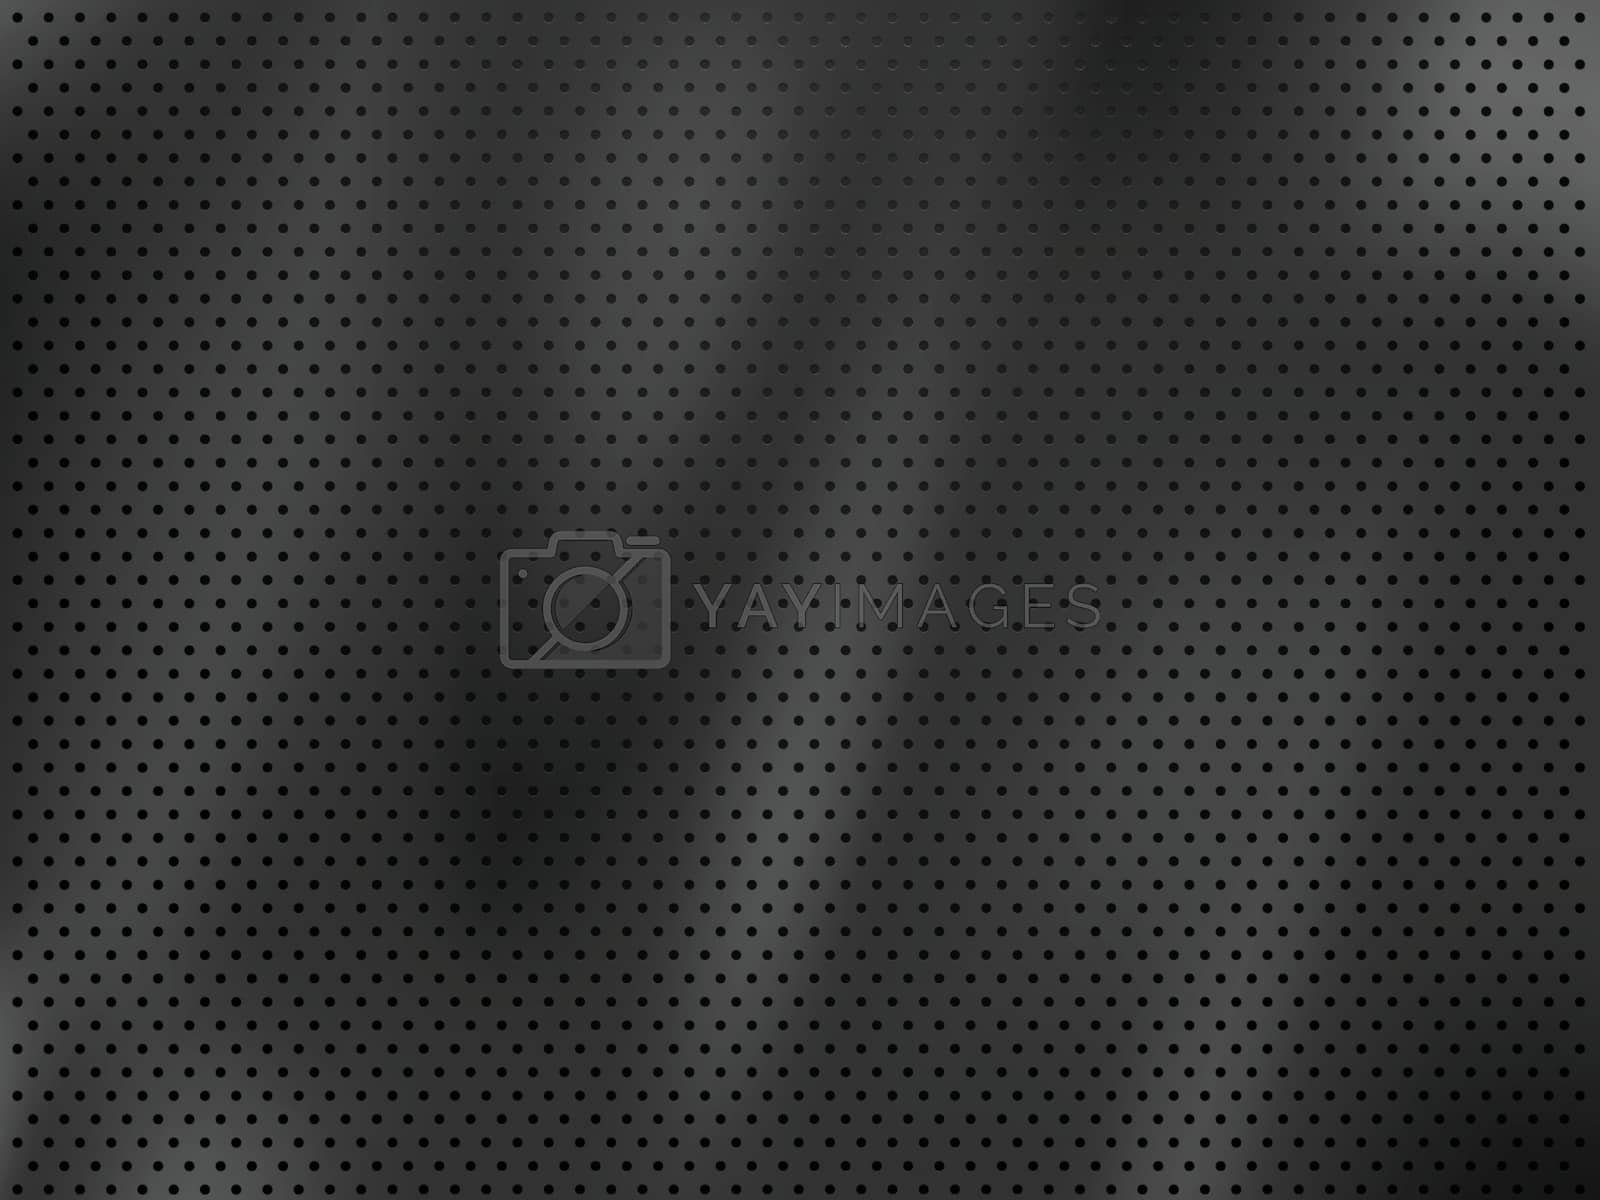 Royalty free image of metal perforated background by ayax